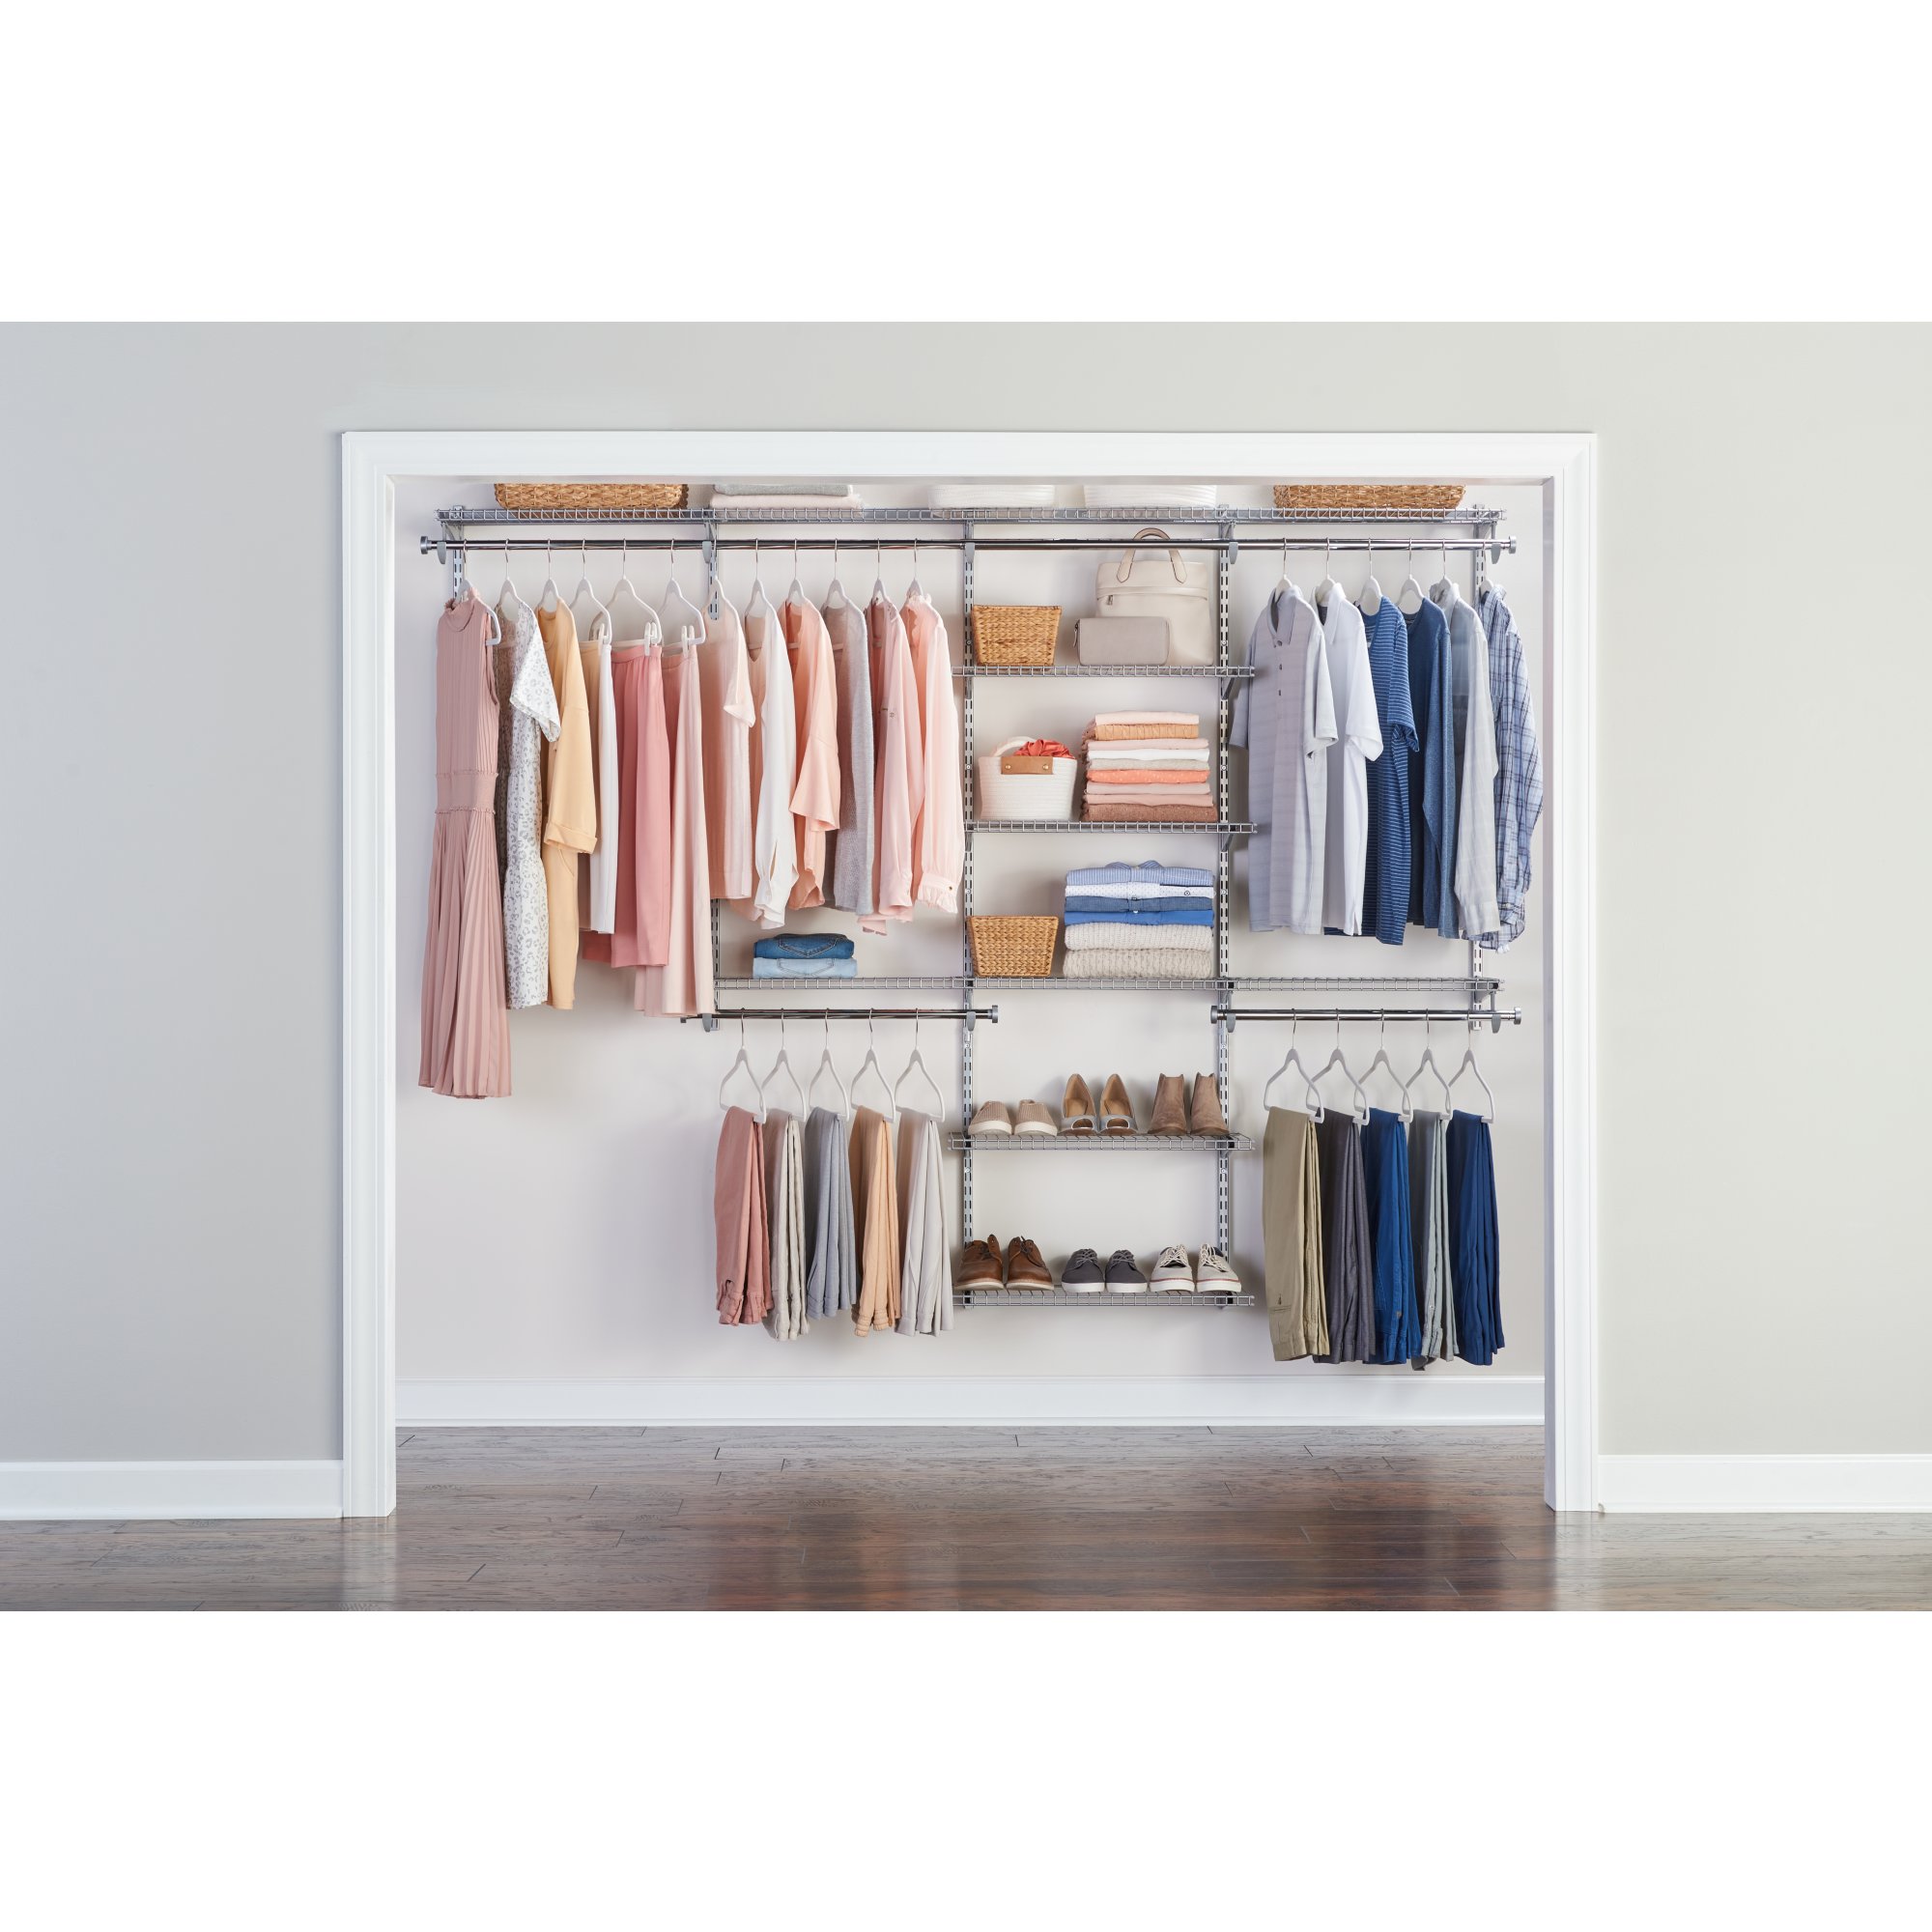 Rubbermaid HomeFree series 4-ft to 8-ft x 12-in White Wire Closet